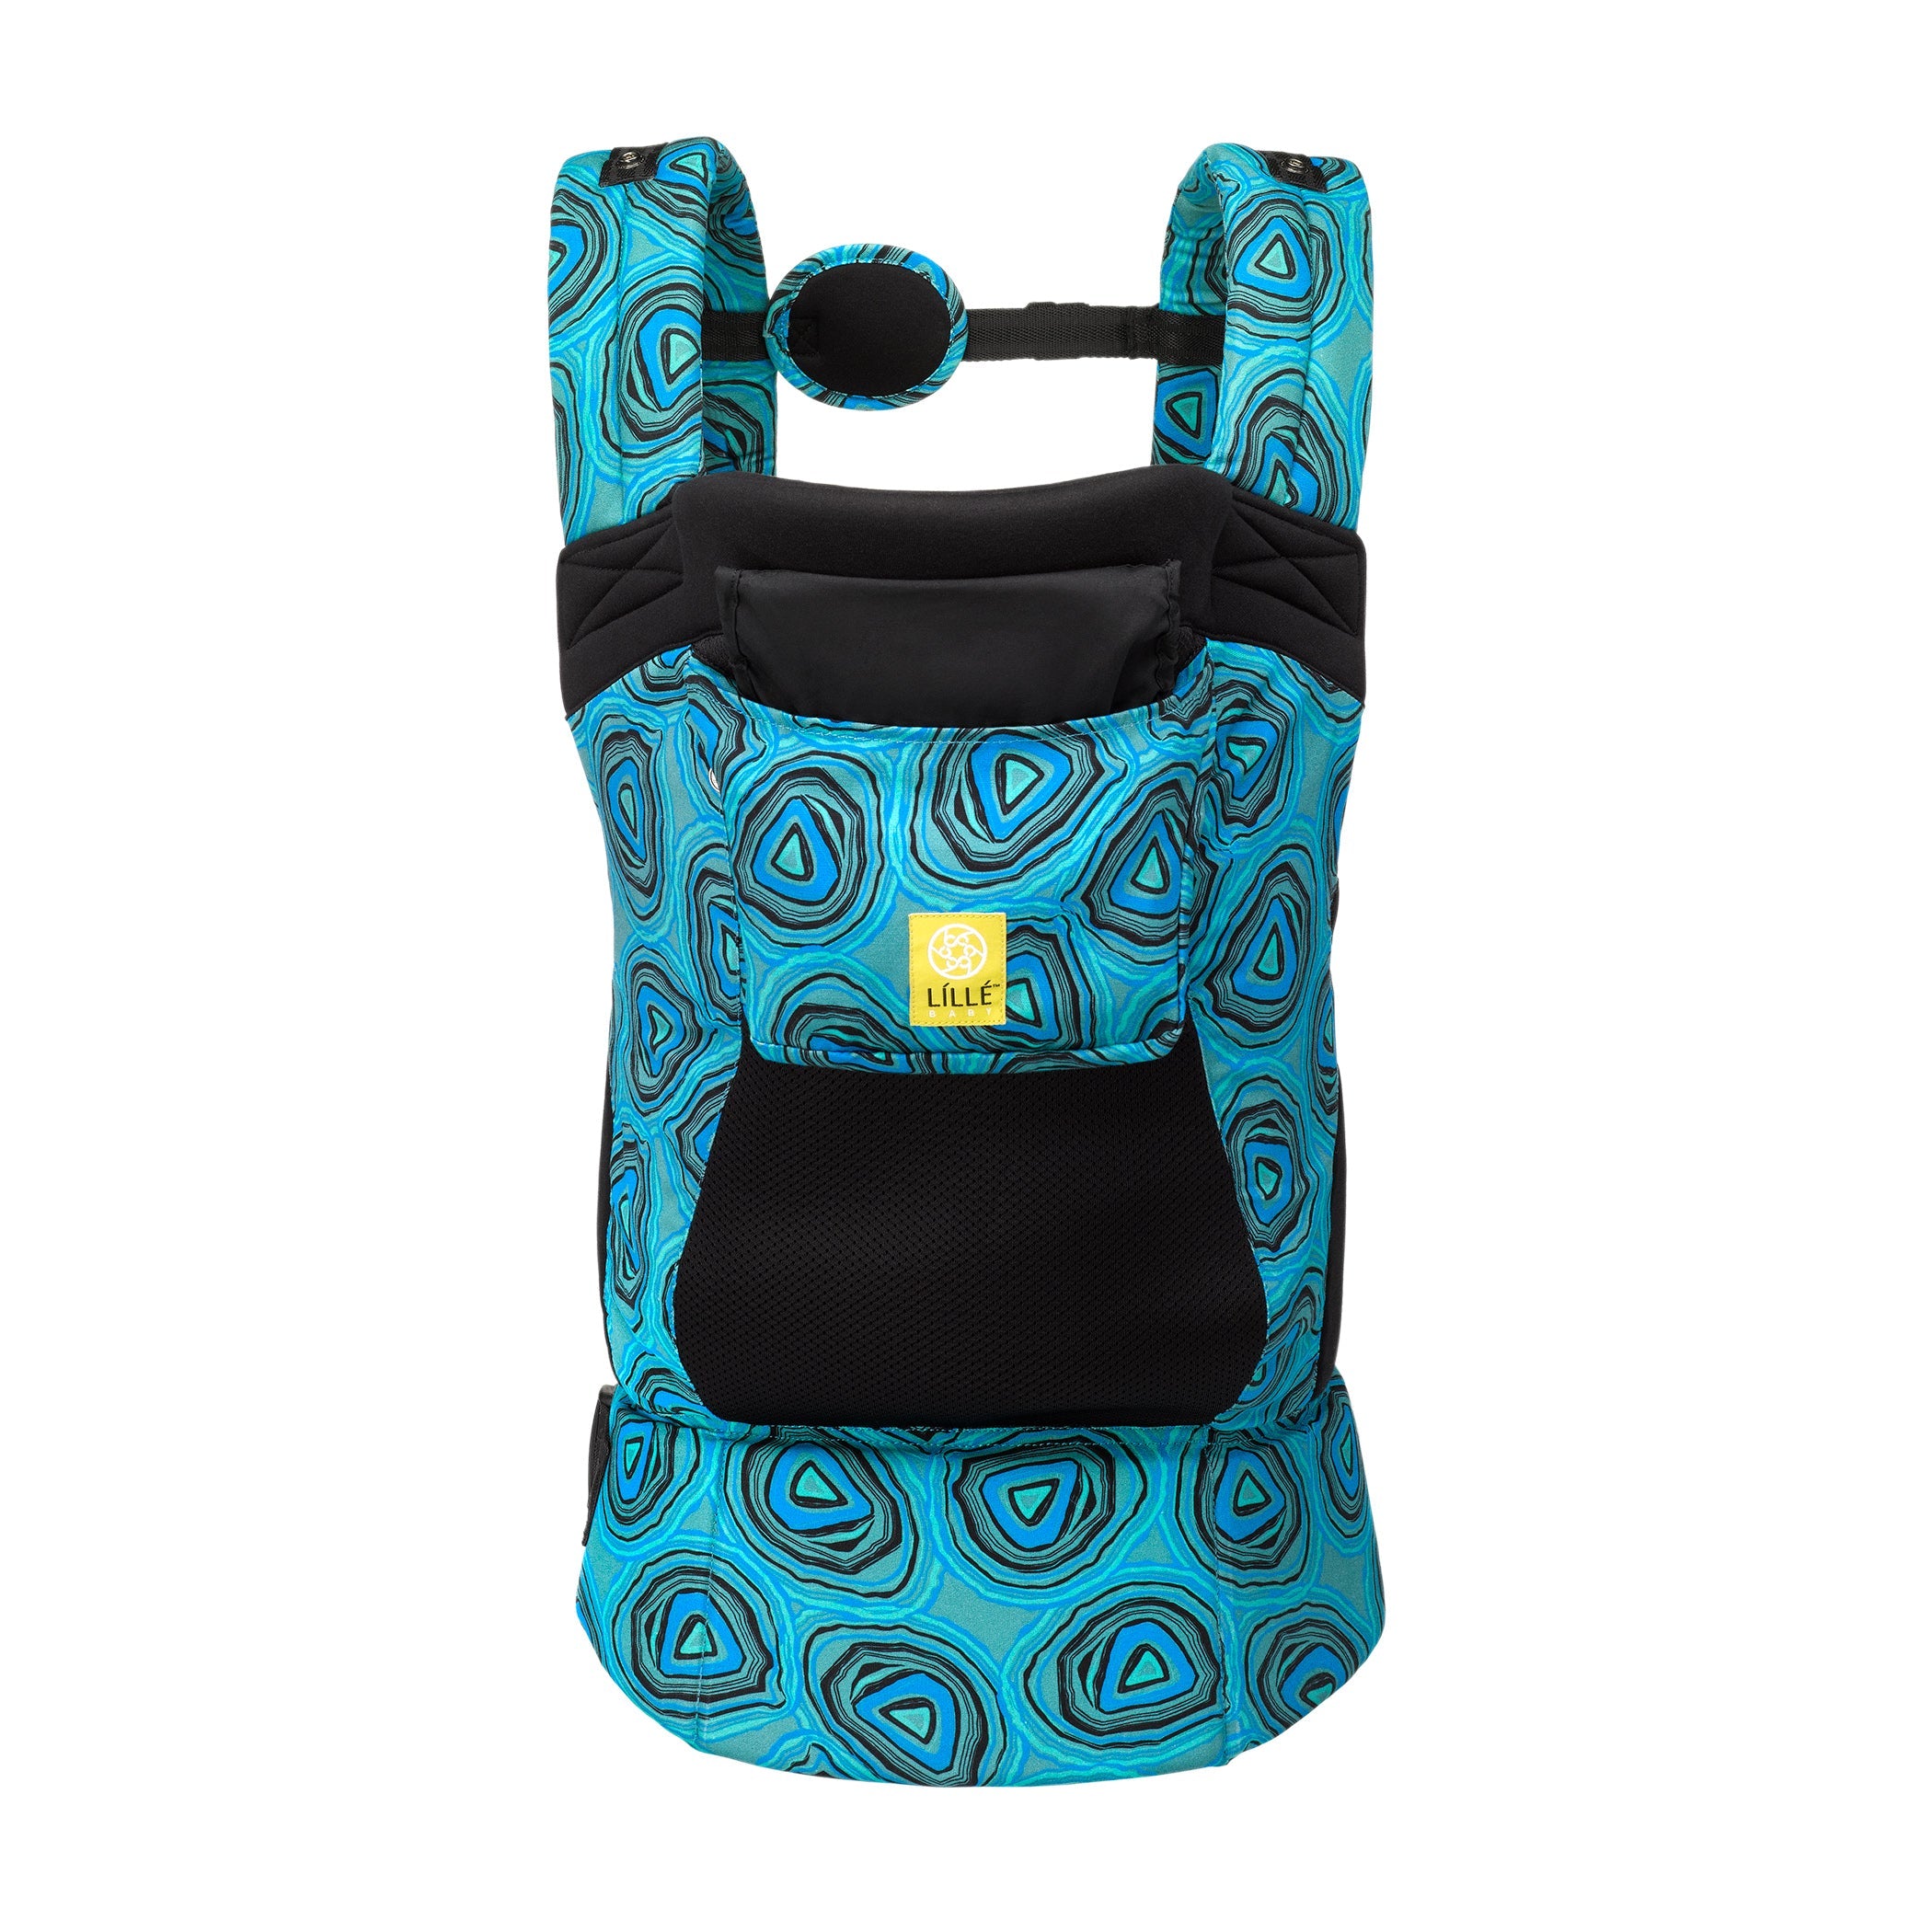 lillebaby carryon baby carrier in blue agate